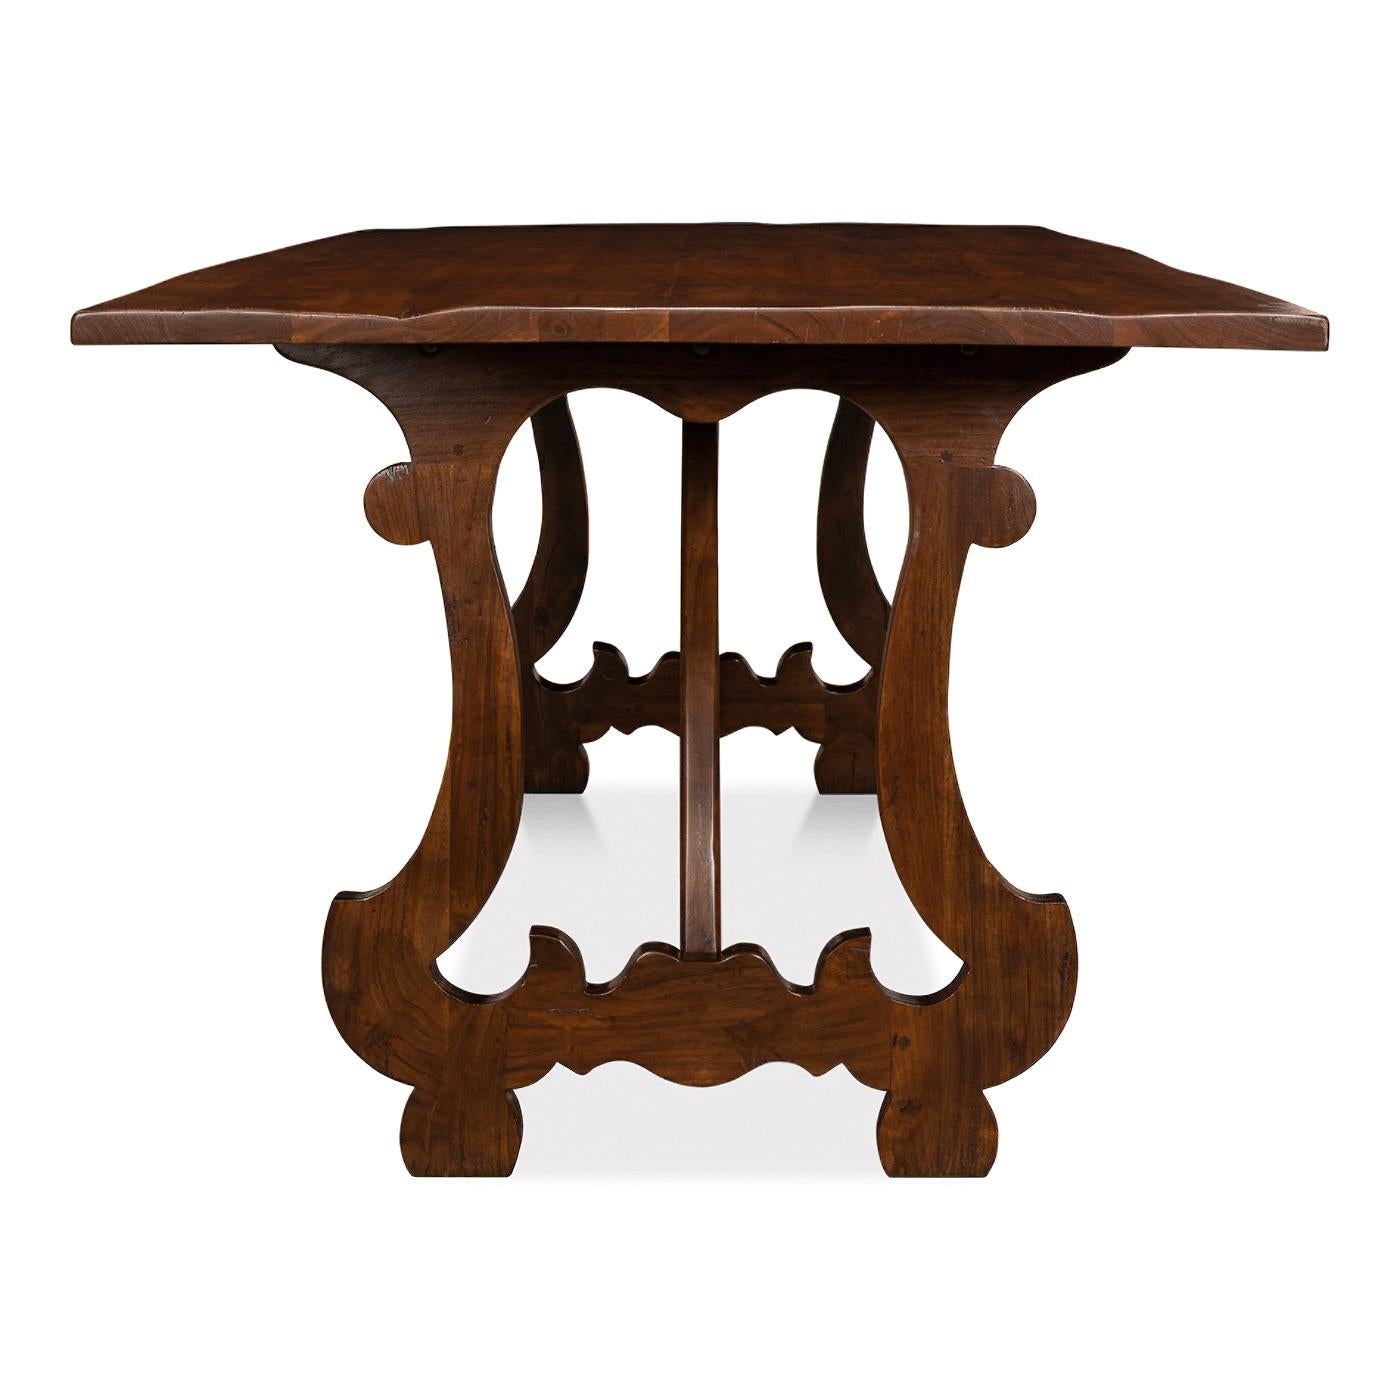 Contemporary European Country Style Dining Table For Sale